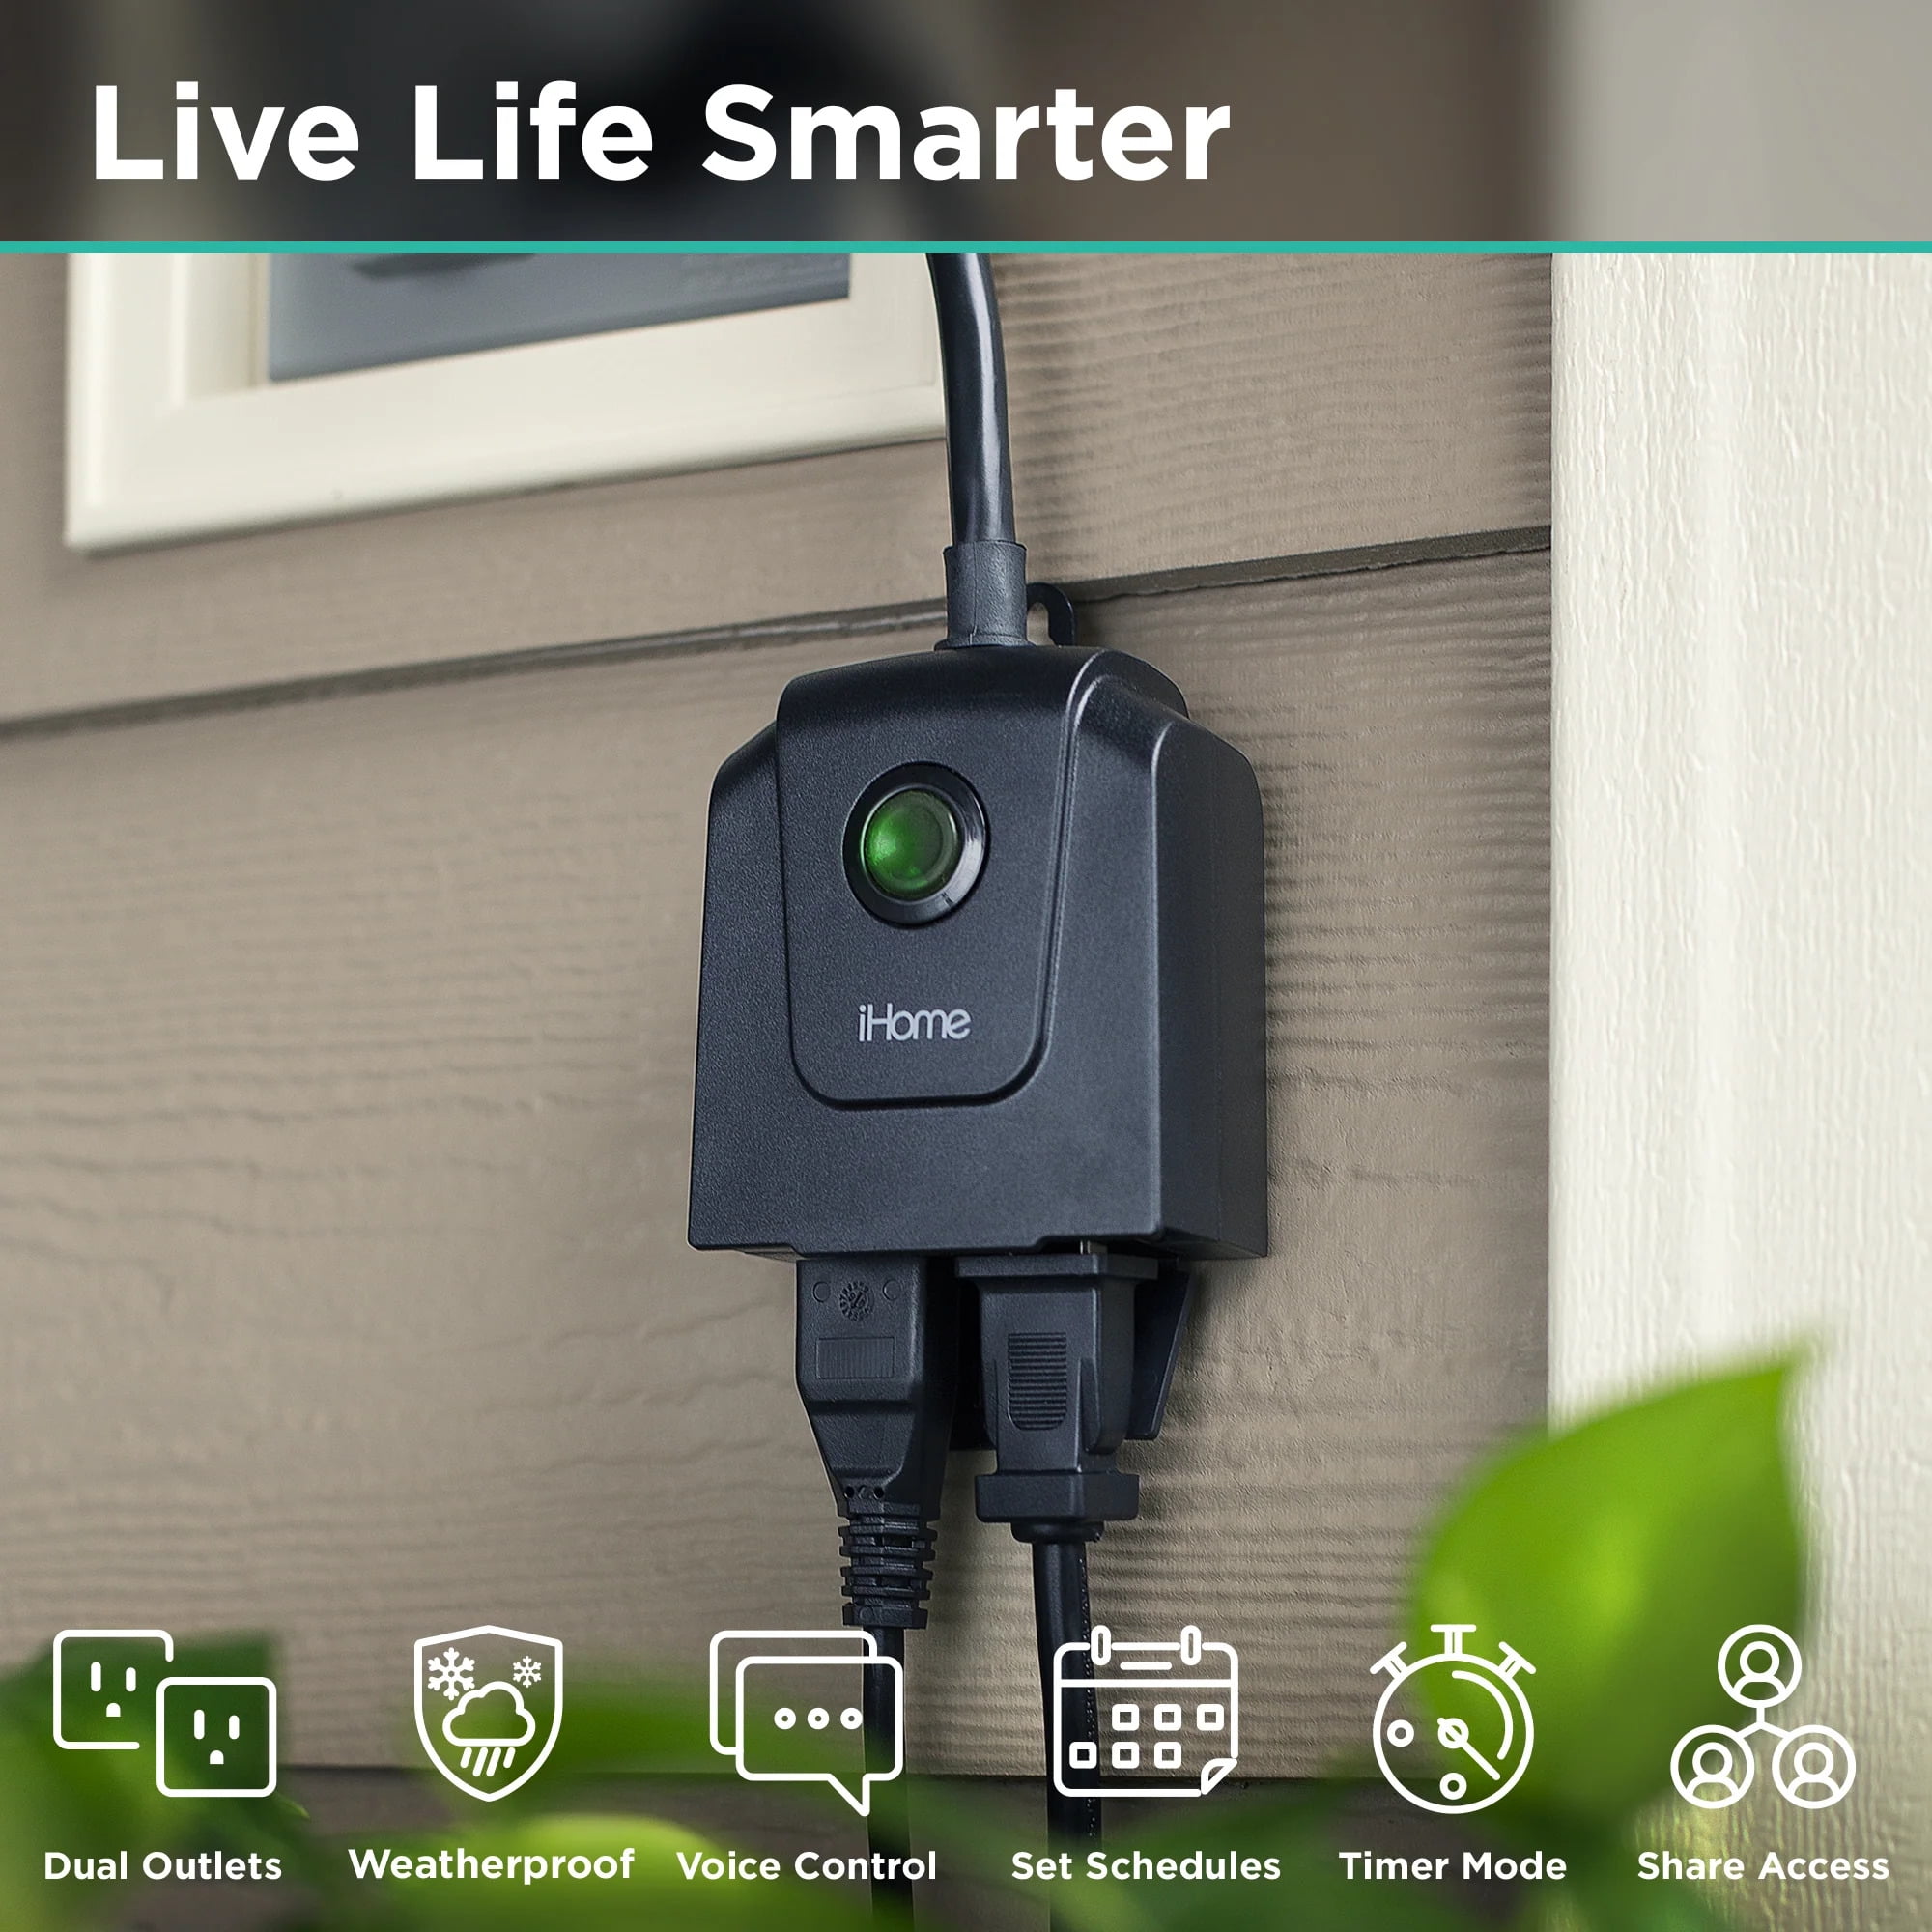 Smart Wi-Fi Plug: Sync Your Outdoors to Your Smart Home - Today's Homeowner